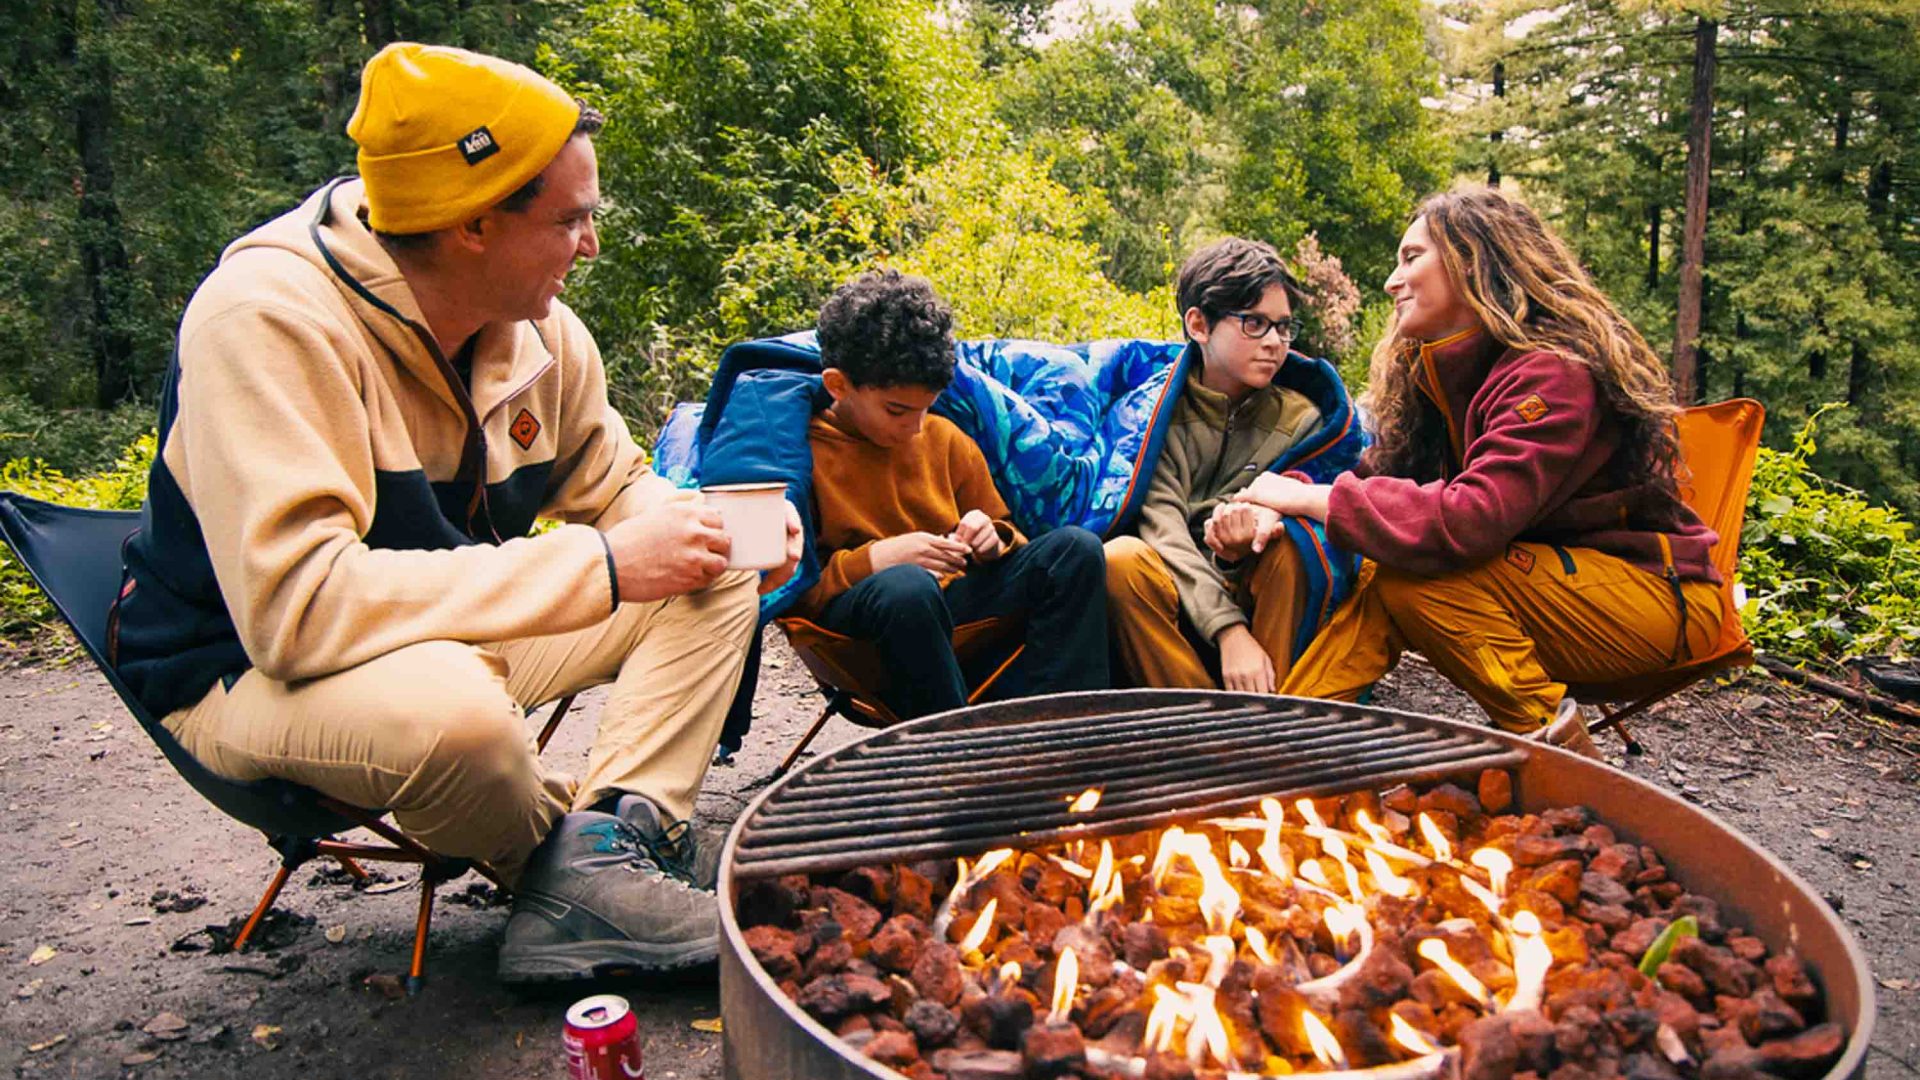 People sit around a fire wearing REI apparel.